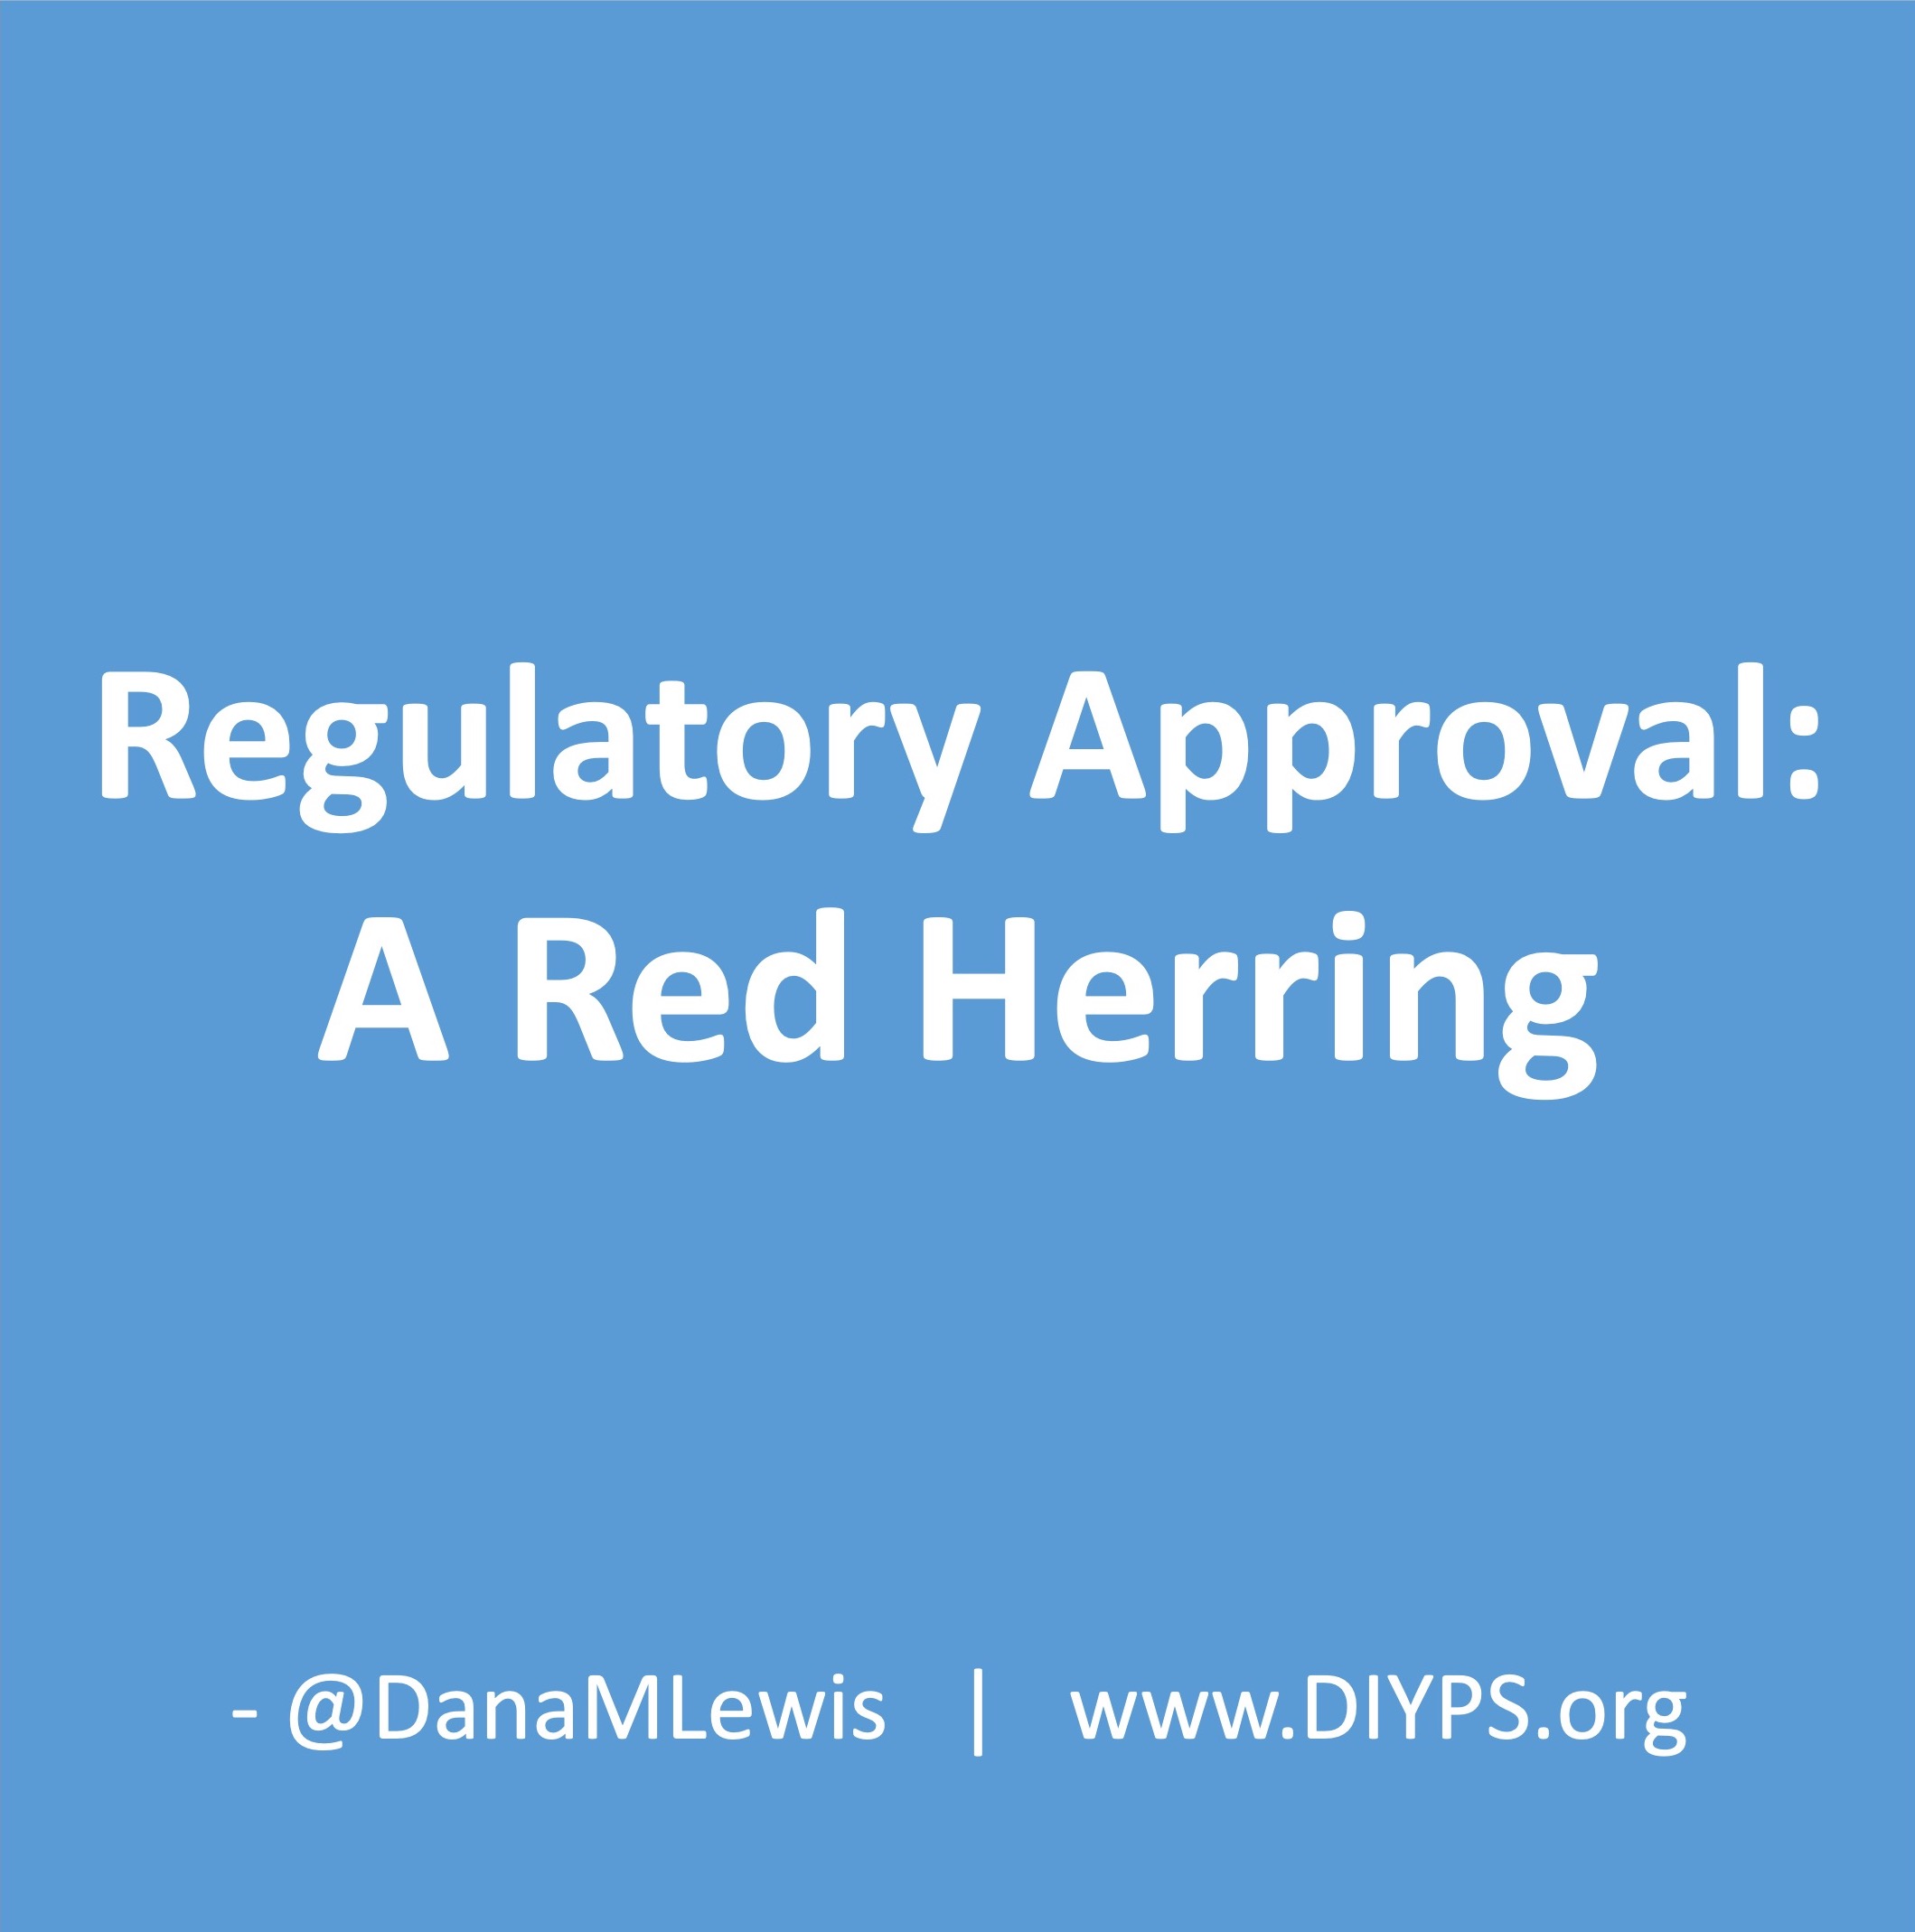 Regulatory Approval: A Red Herring